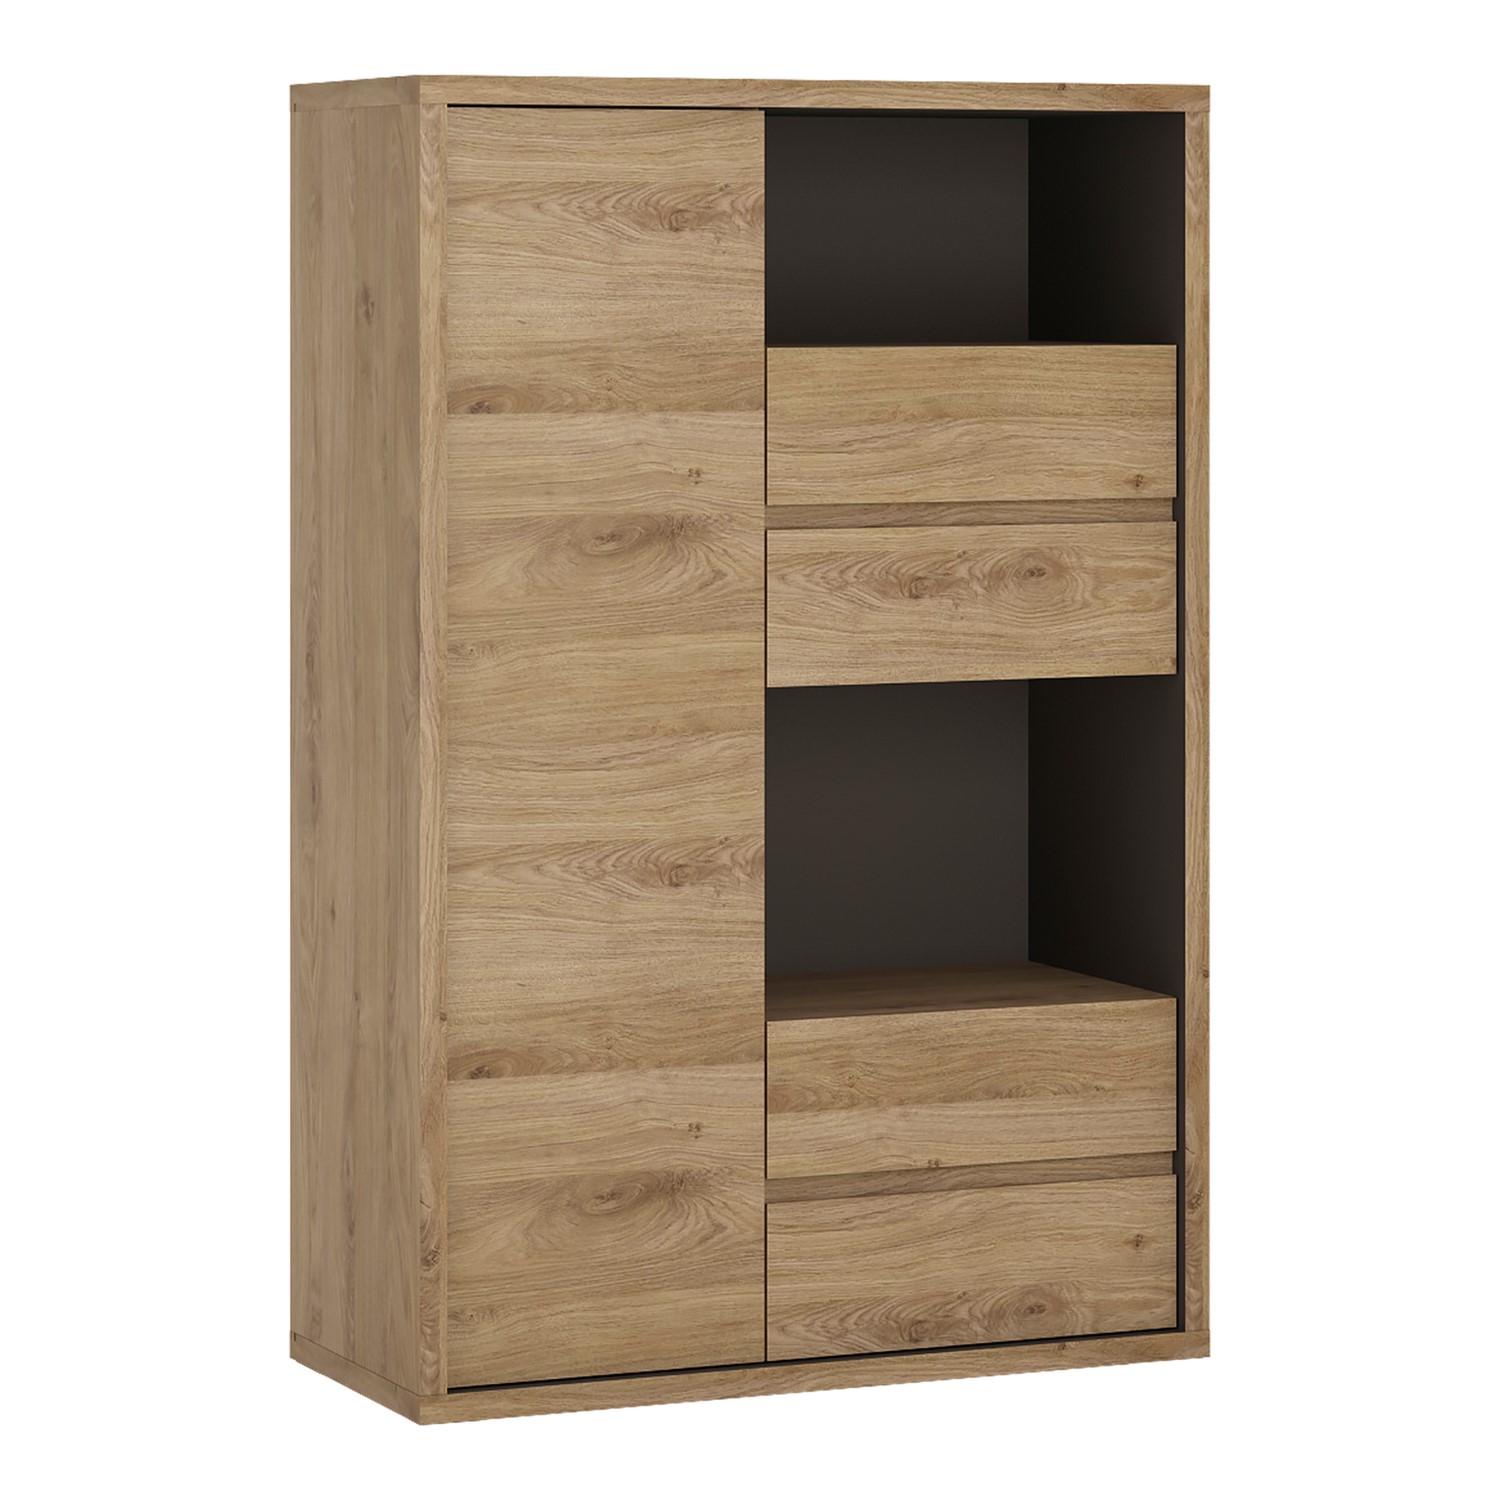 Photo of Wood display cabinet with drawers - shetland